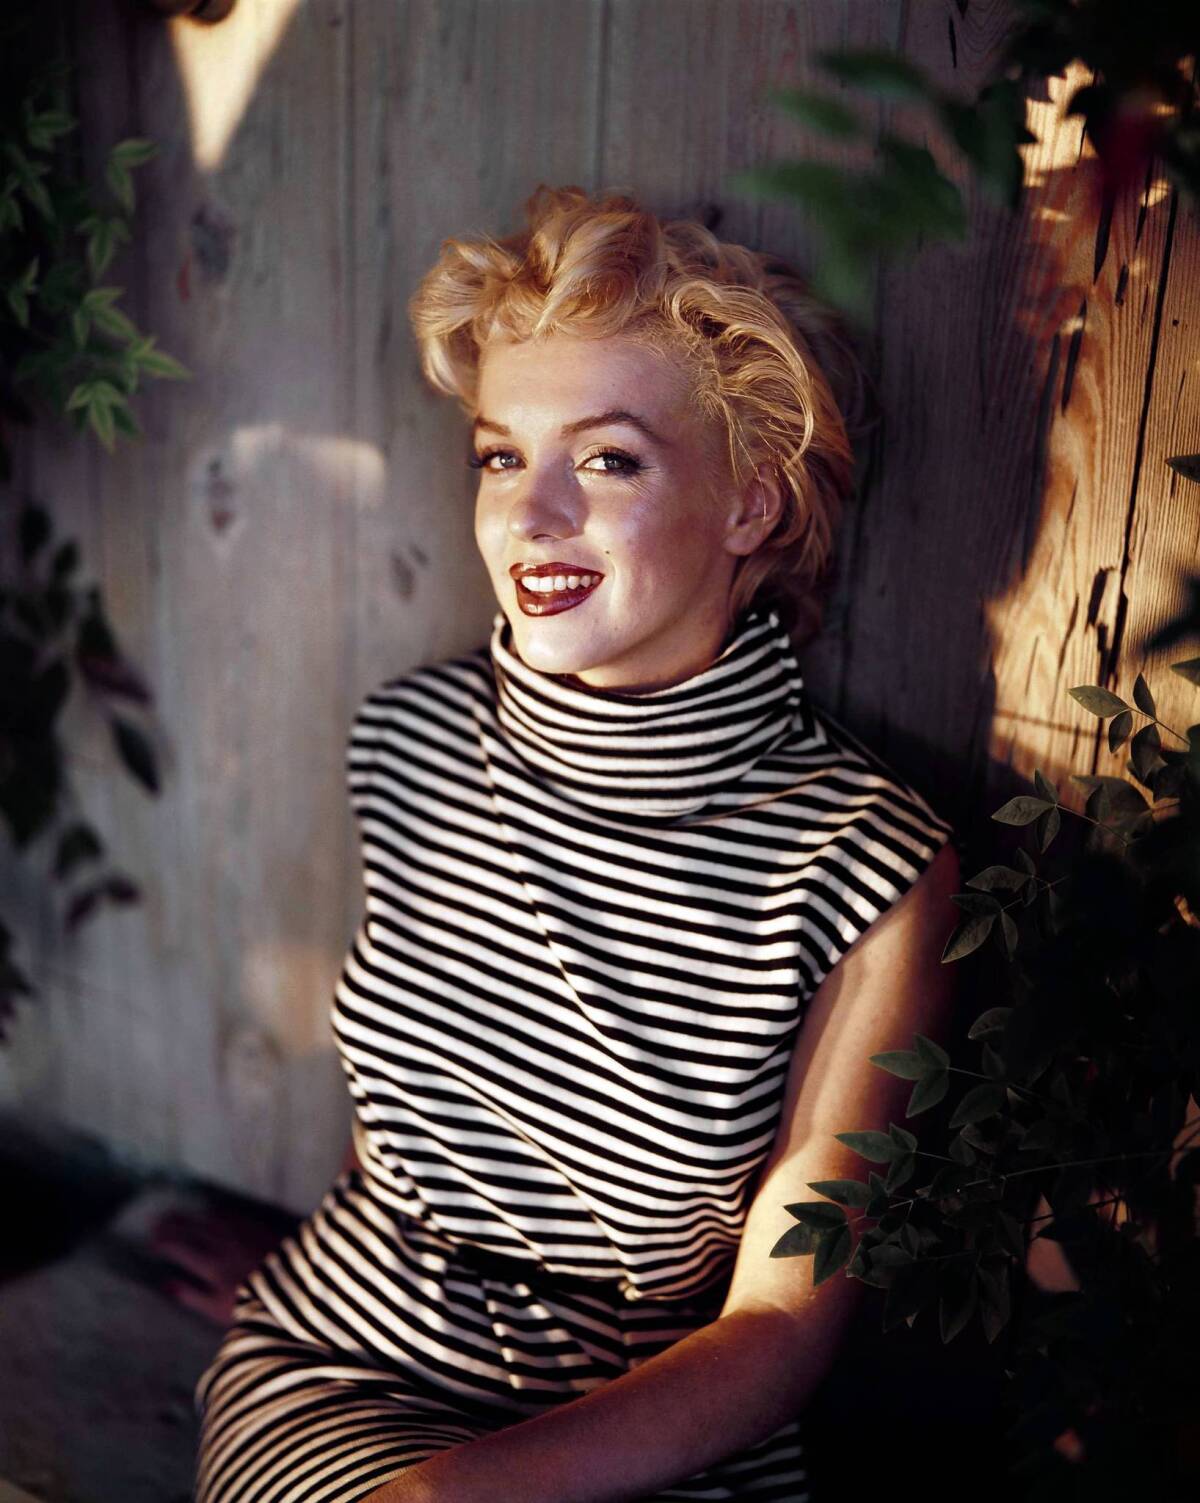 Marilyn Monroe redefined sex appeal in the 1950s and still reigns as a fashion and style influence.